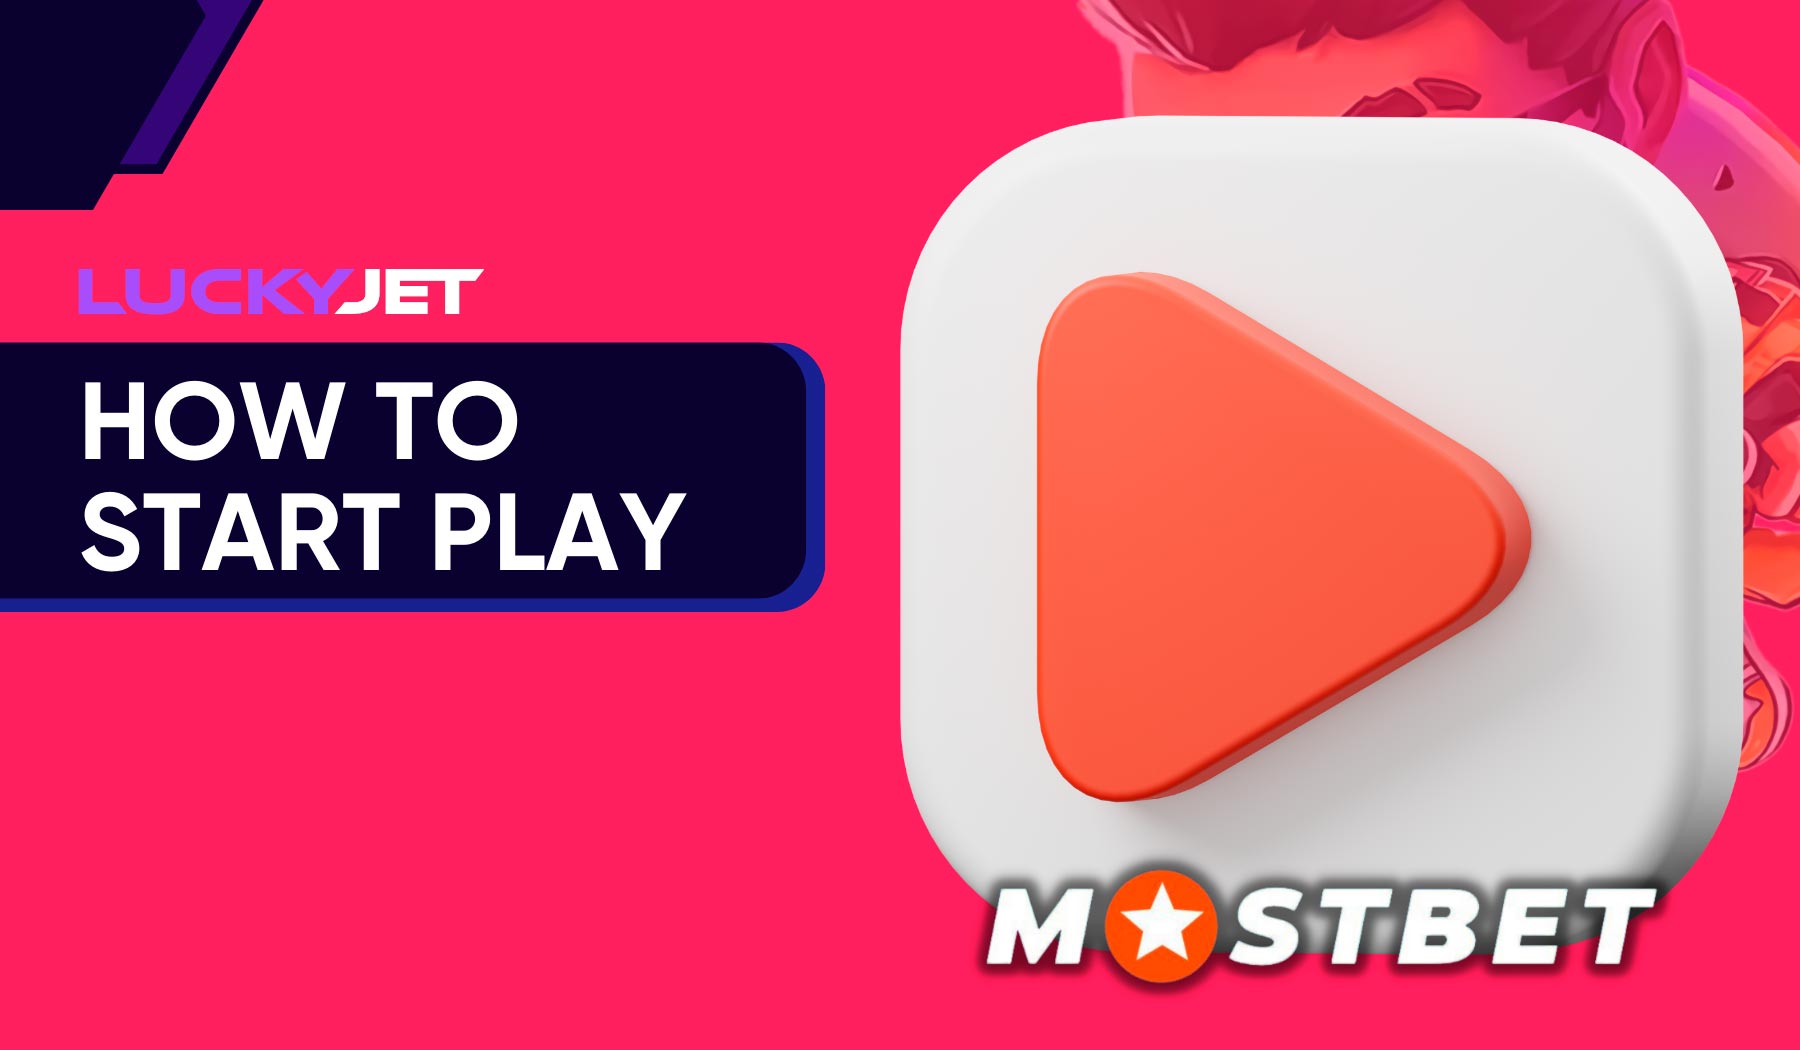 Getting started playing Lucky Jet on Mostbet